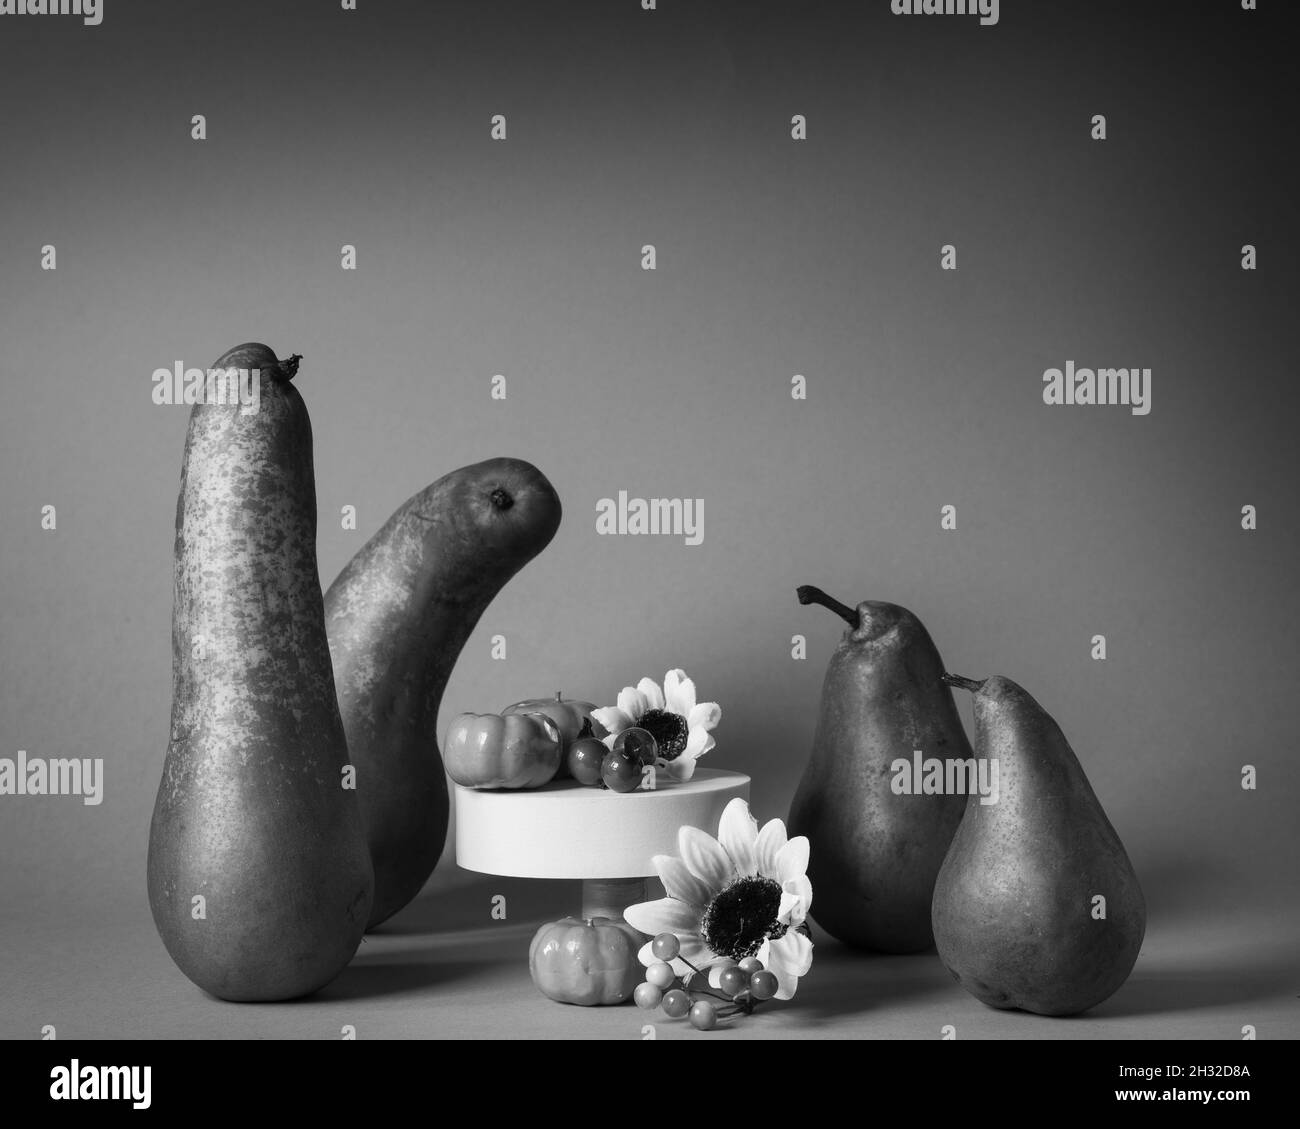 Pears represent people celebrating Thanksgiving Stock Photo